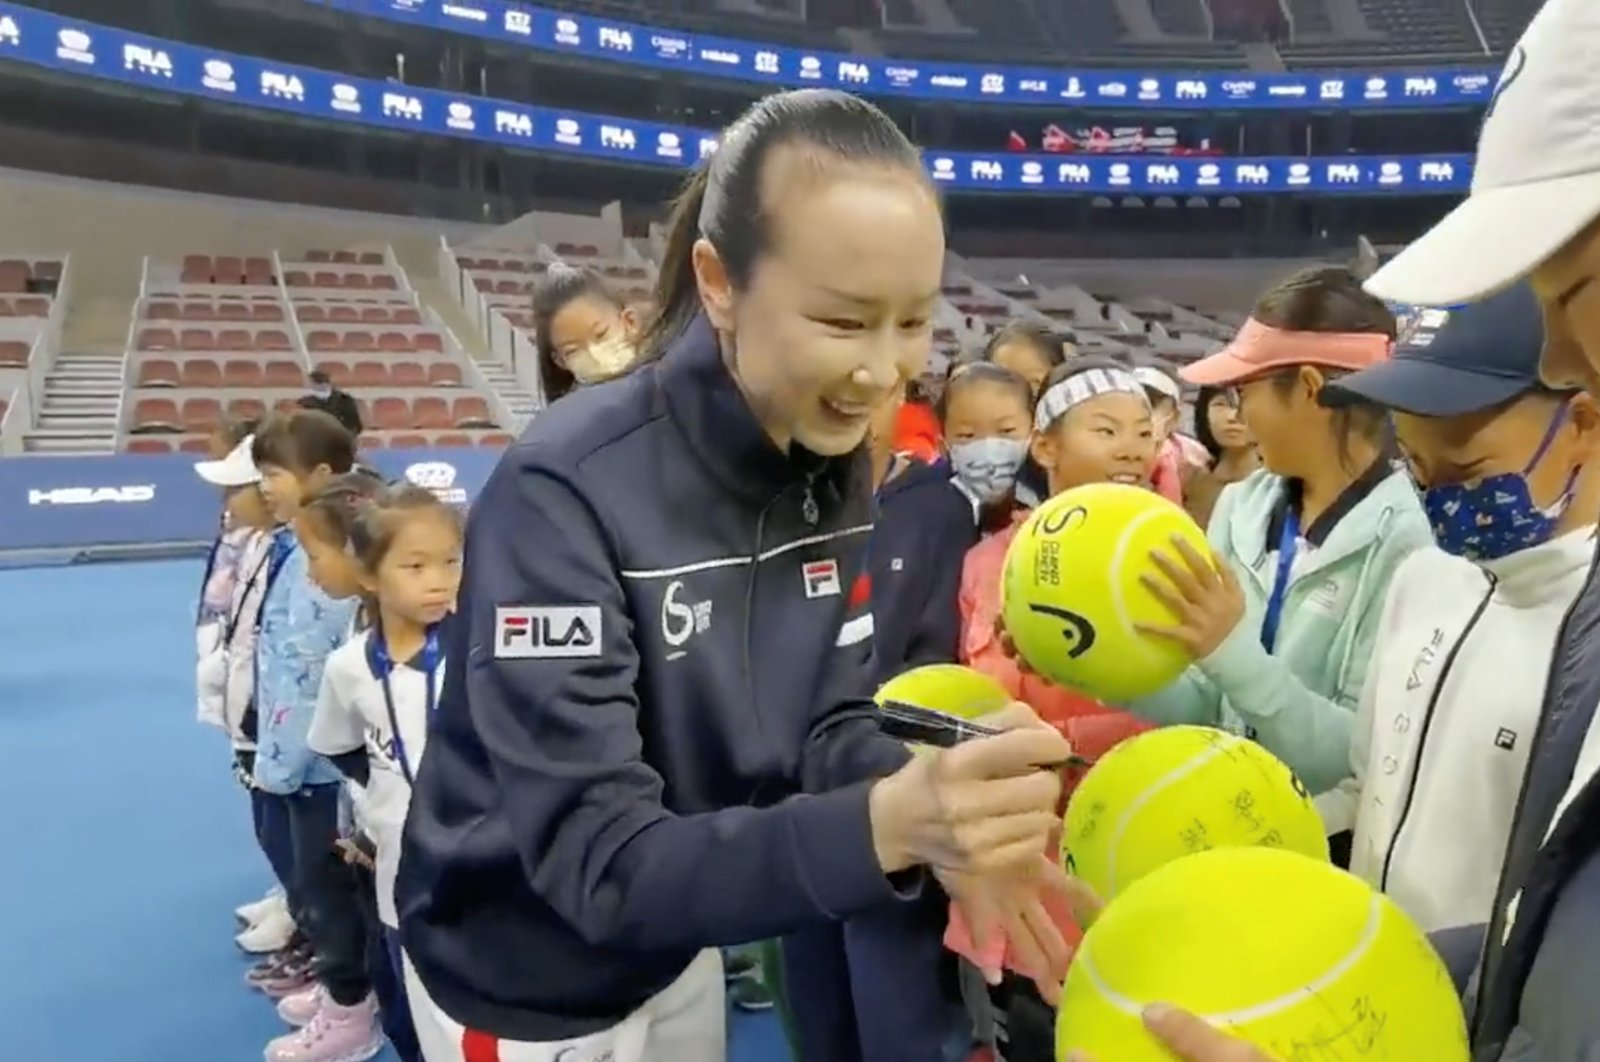 Chinese tennis player Peng Shuai signs large-sized tennis balls at the opening ceremony of Fila Kids Junior Tennis Challenger Final in Beijing, China Nov. 21, 2021. (Twitter @Qingqingparis via Reuters)